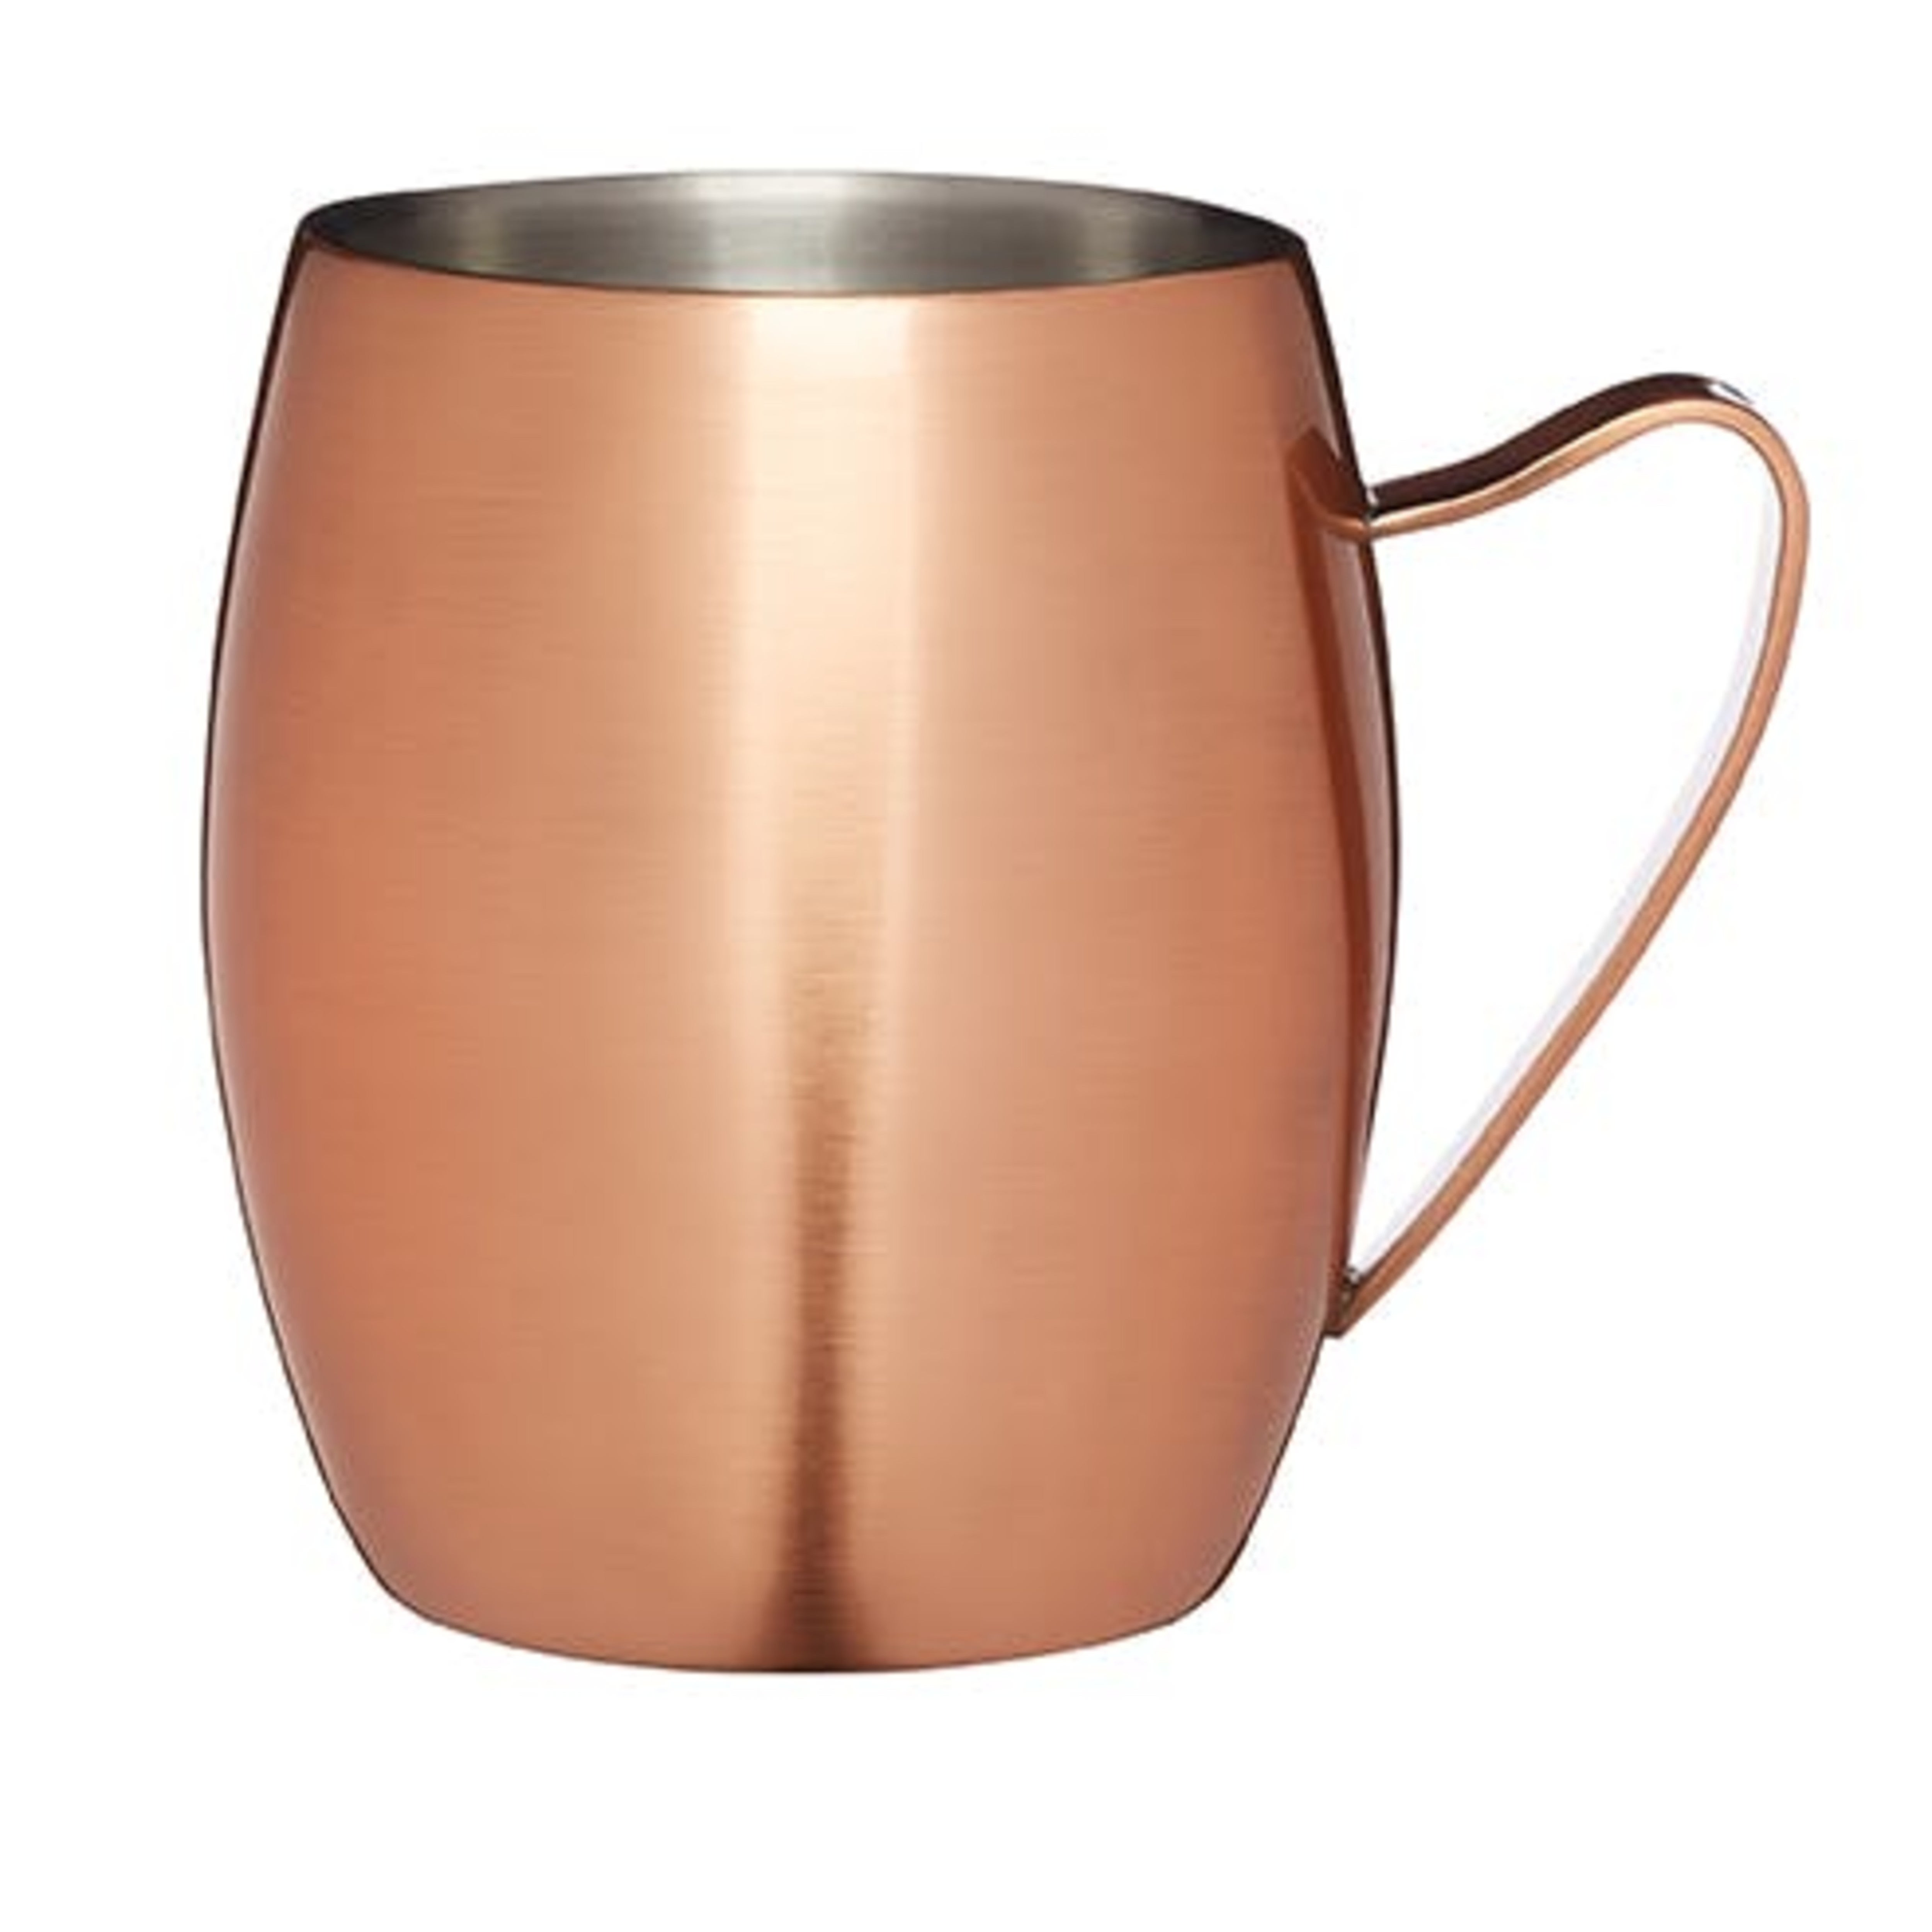 Photos - Mug / Cup BarCraft Double Walled Moscow Mule Mug Copper